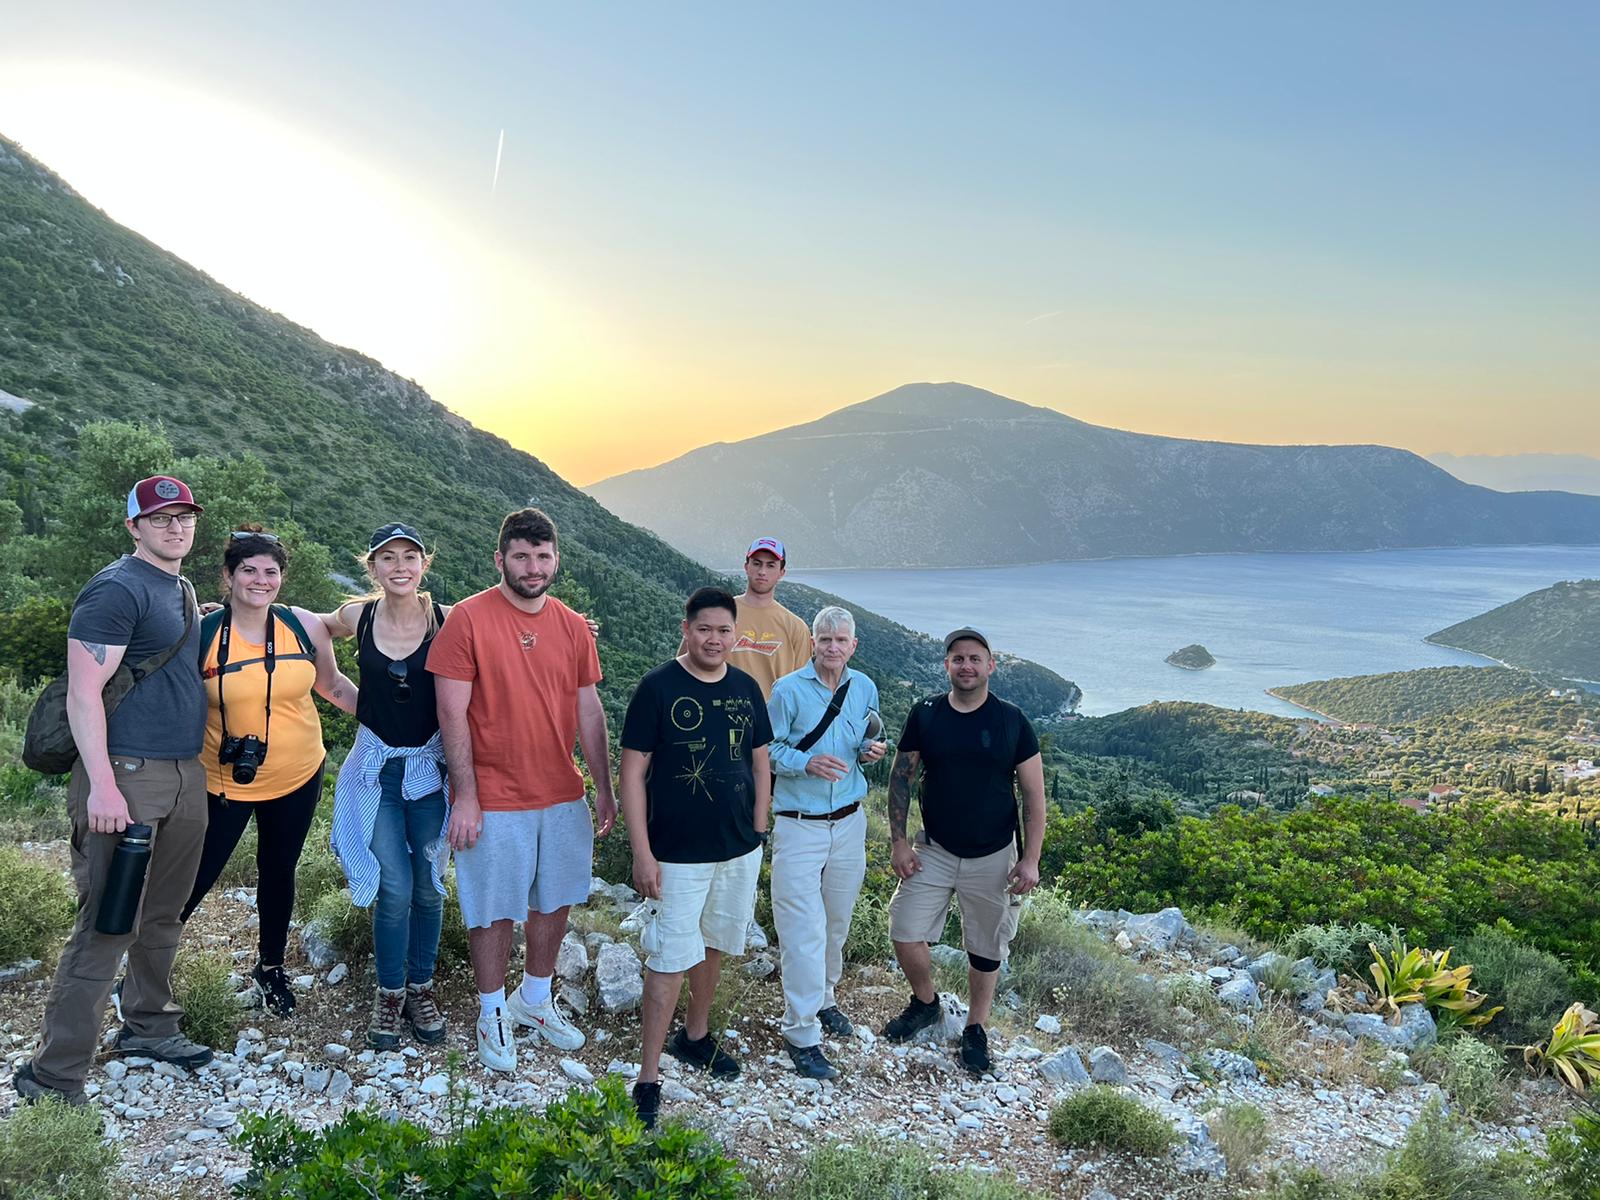 Students in Stockton's Worlds of Homer class, offered through the Military and Veteran Success Center, spent 11 days in Greece to help veteran students examine topics related to war and their own military experience.